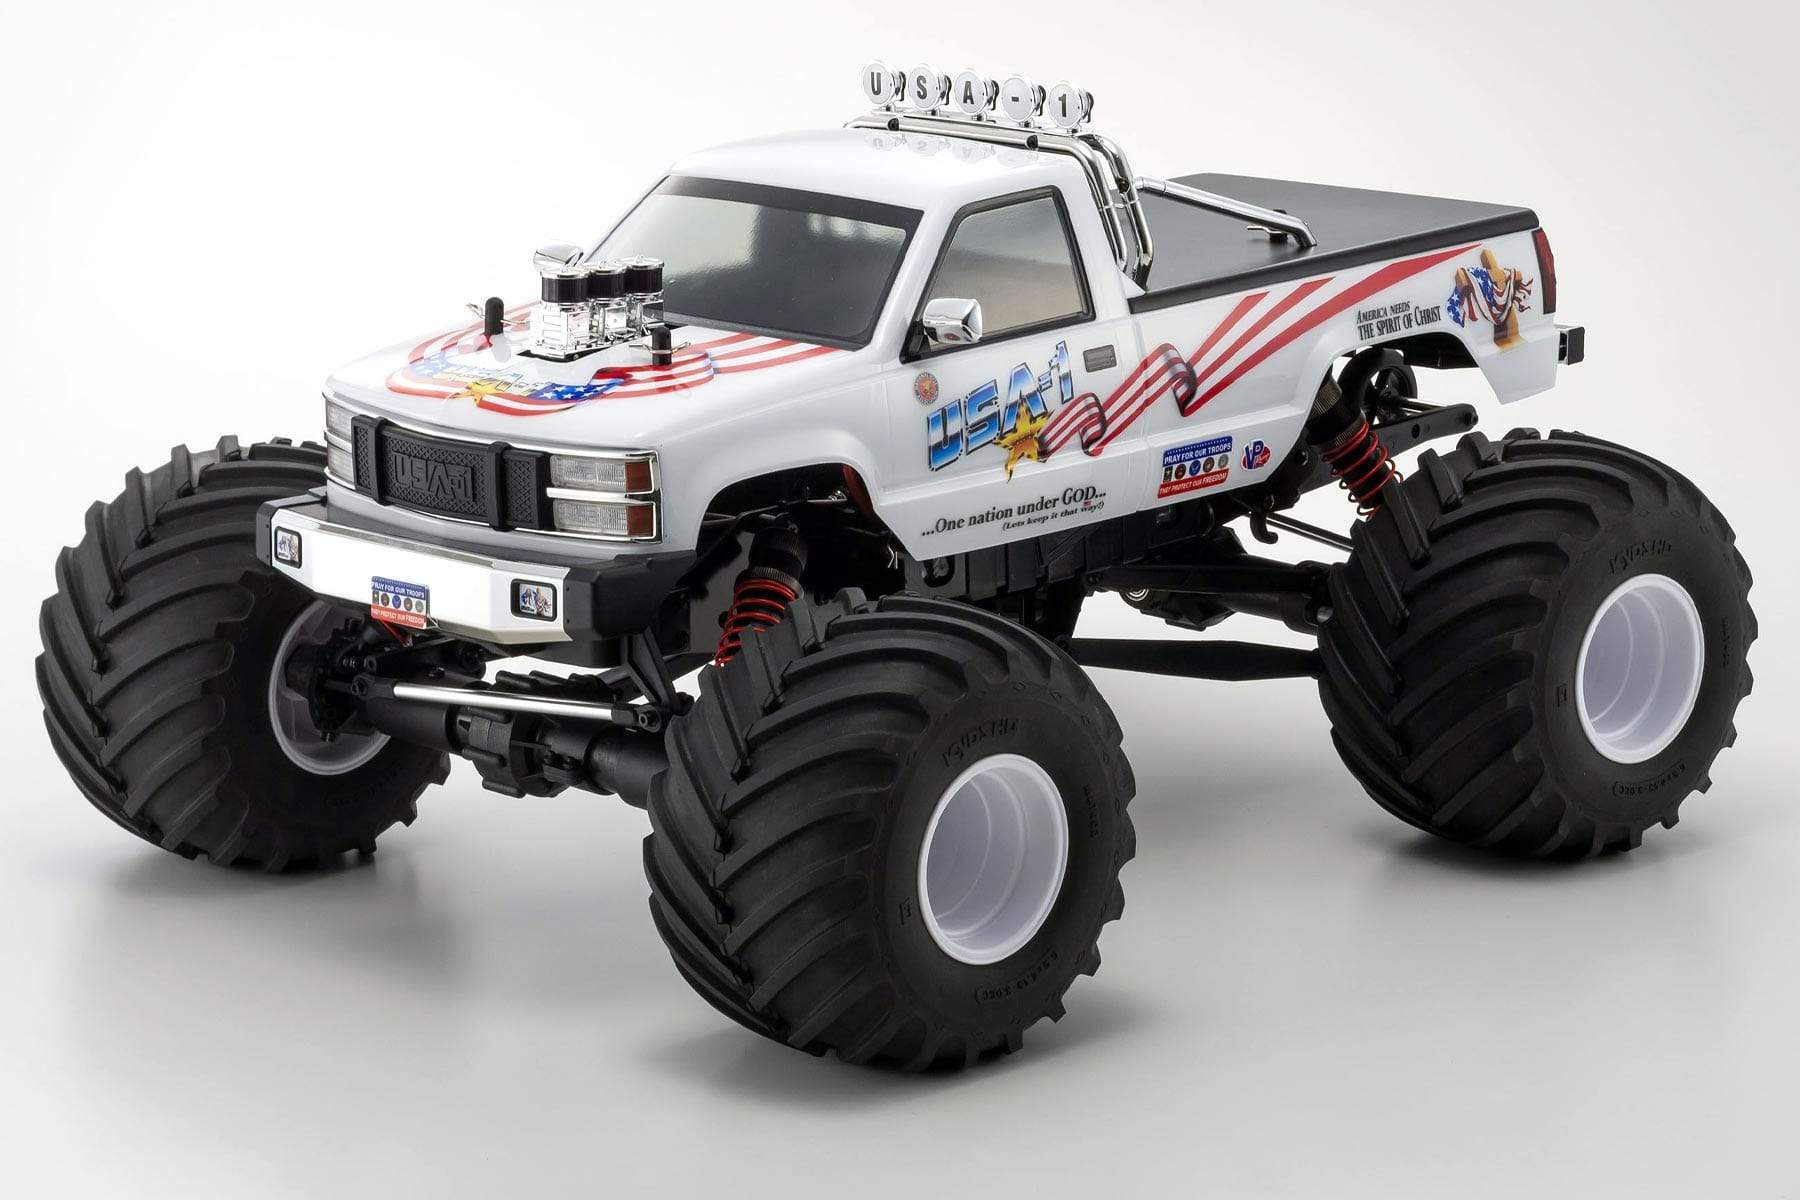 Kyosho USA-1 GP .25 Engine MT Monster Truck 1/8 Scale 4WD - RTR